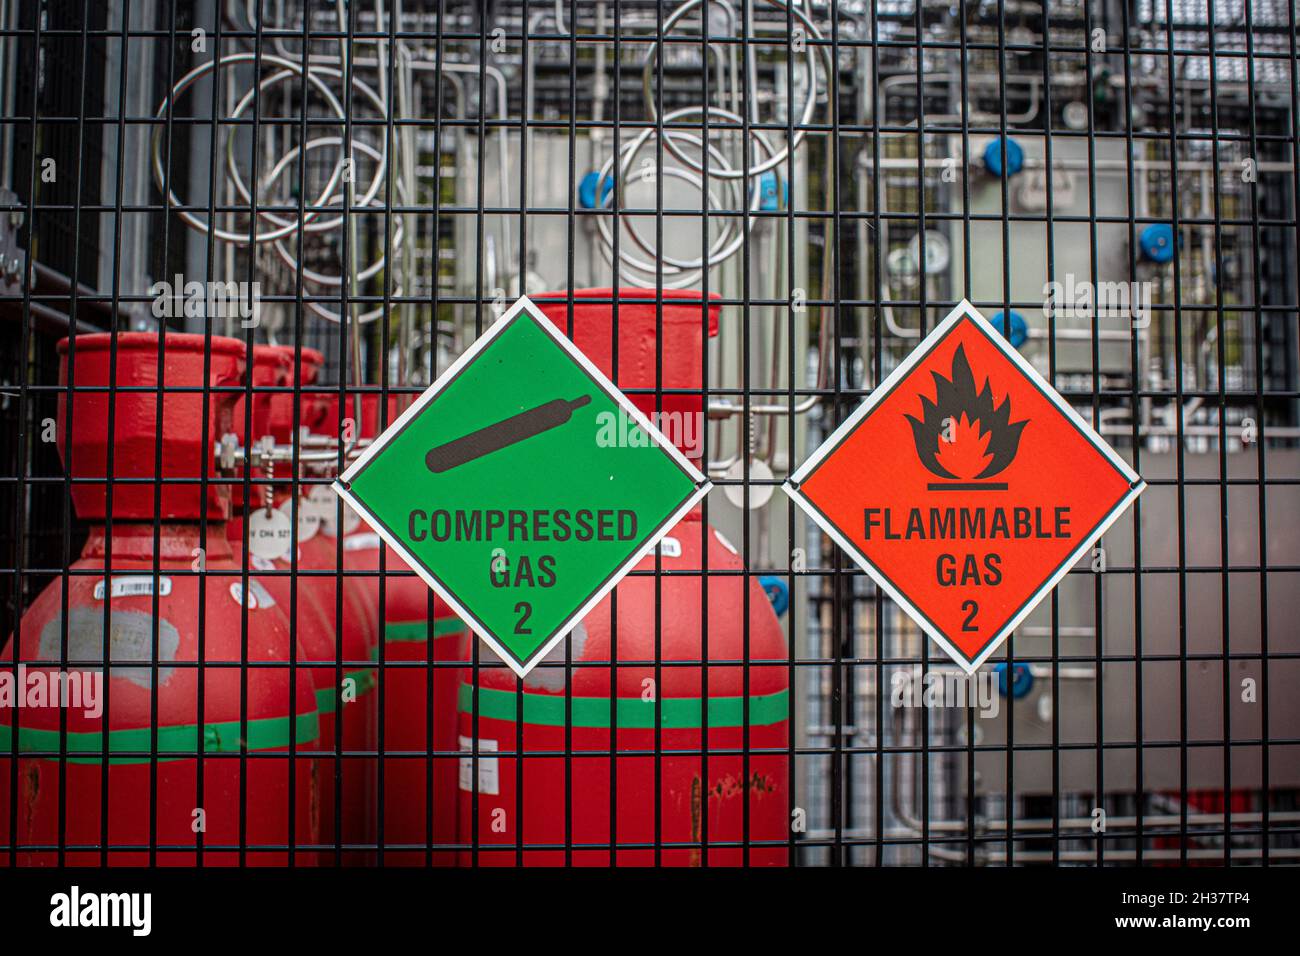 Gas bottles in storage yard. Various gaseous chemicals stored in steel bottles. Stock Photo